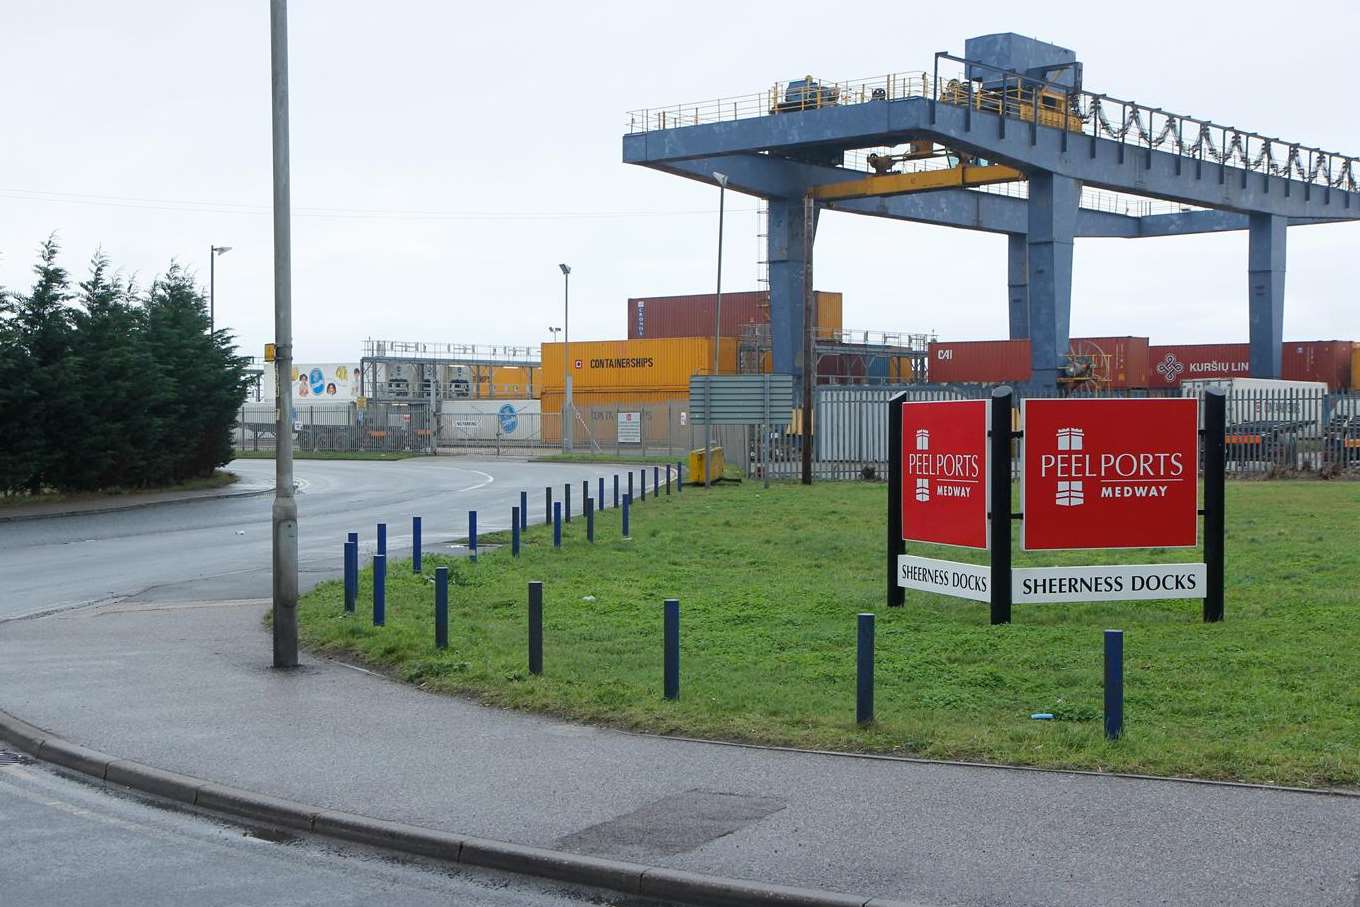 The entrance to the port of Sheerness